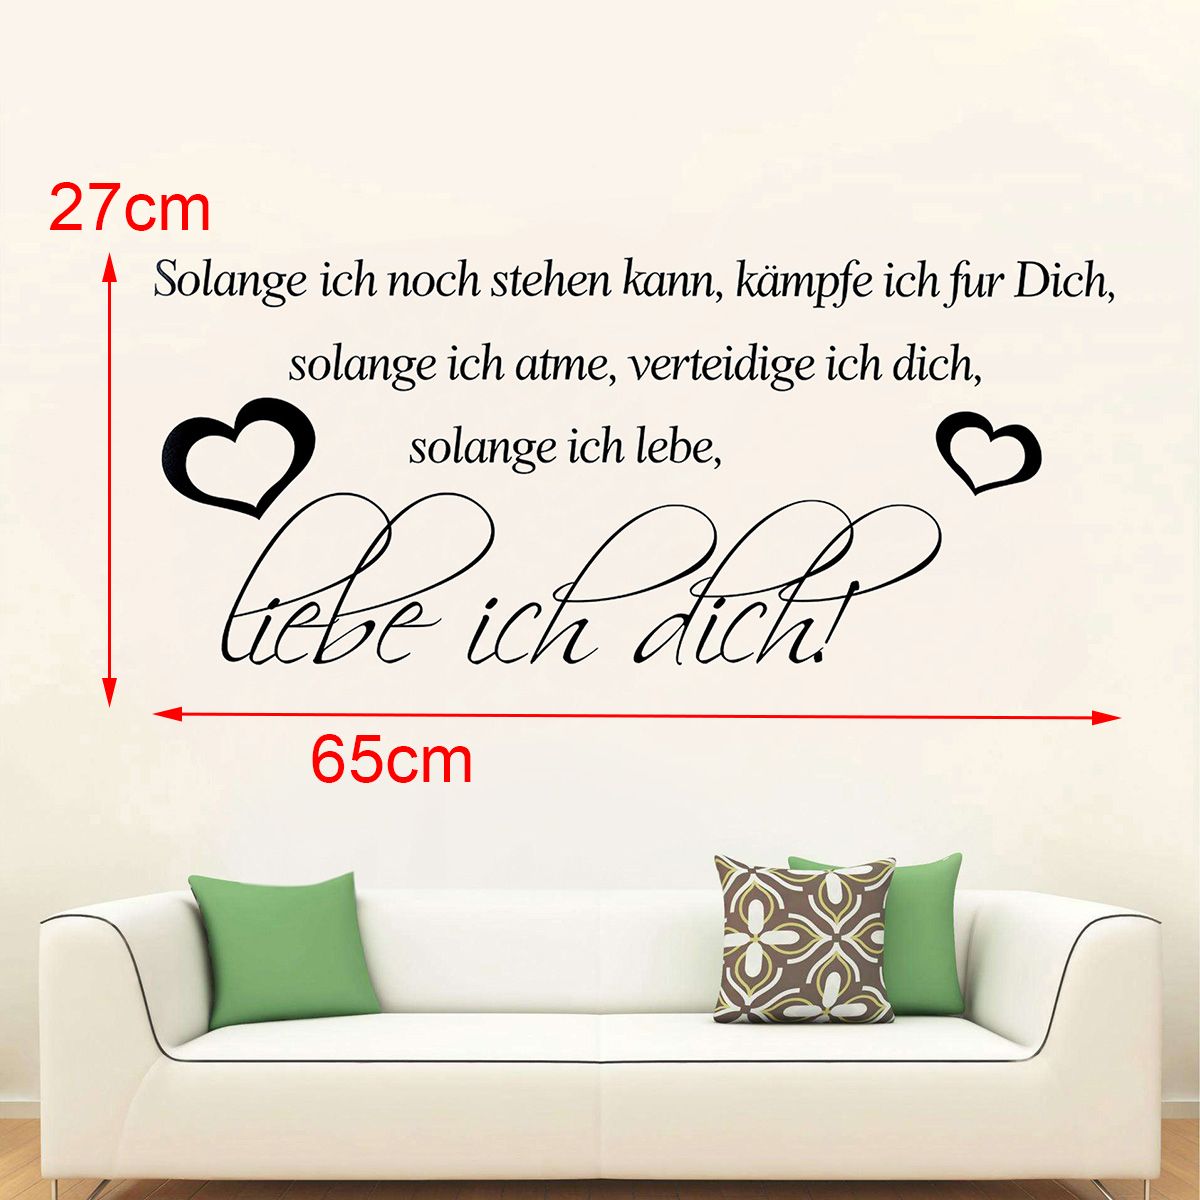 PVC-Wall-Sticker-Quotes-Decals-Stickers-Living-Study-Bedroom-Art-Home-Room-Decor-1515472